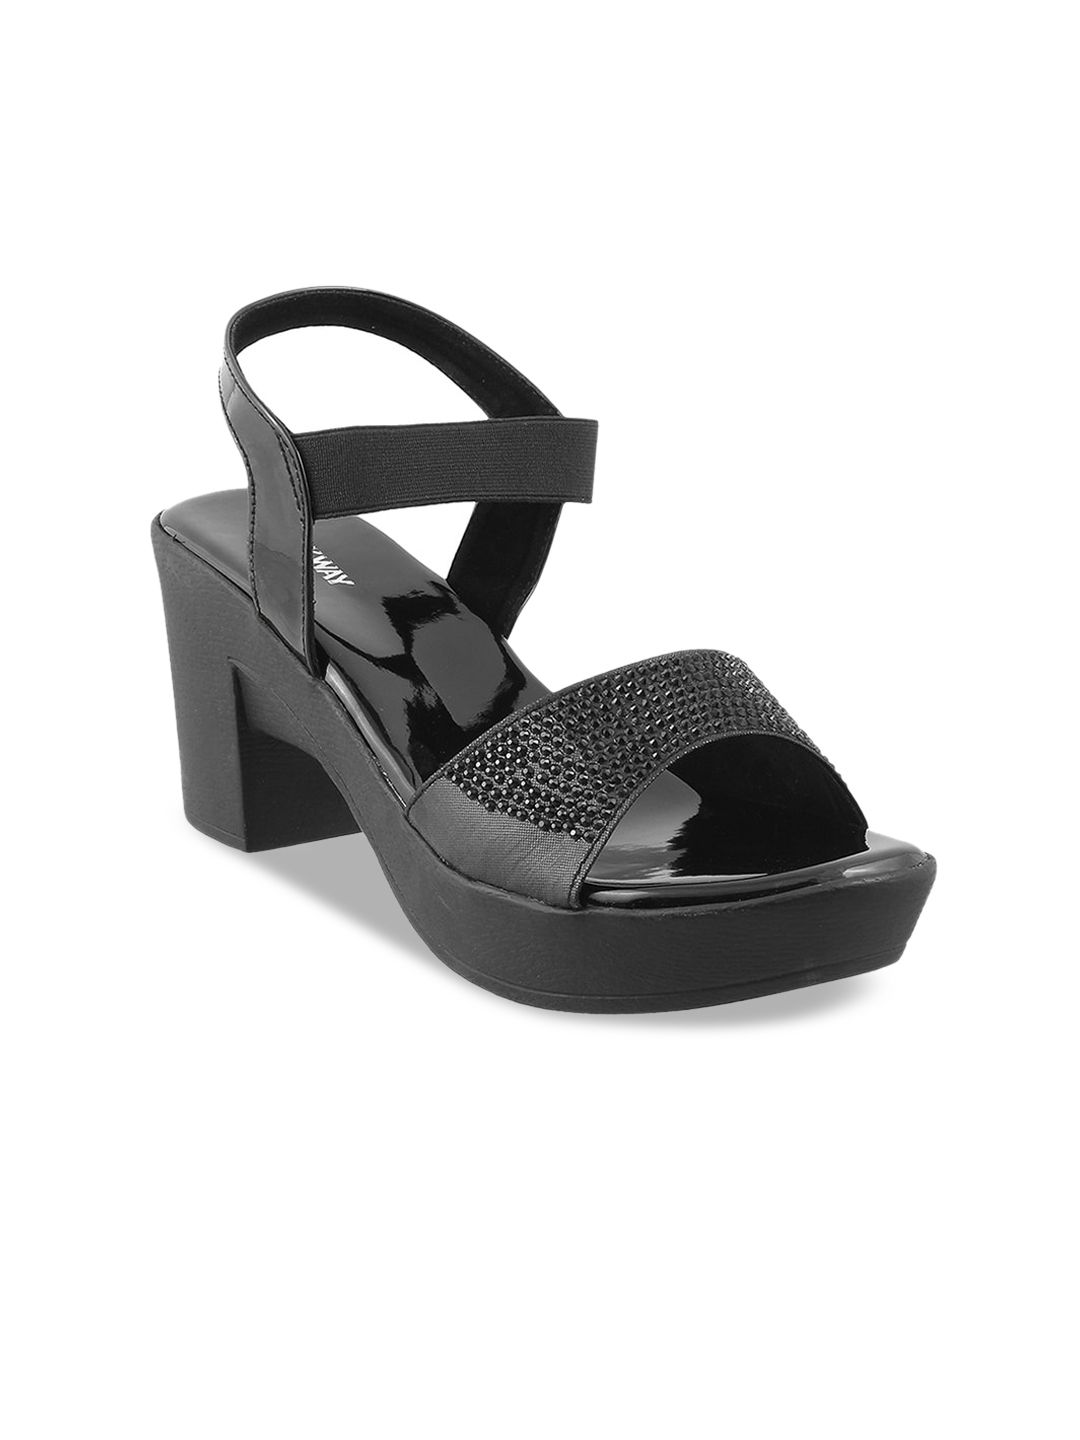 WALKWAY by Metro Black Platform Sandals with Laser Cuts Price in India